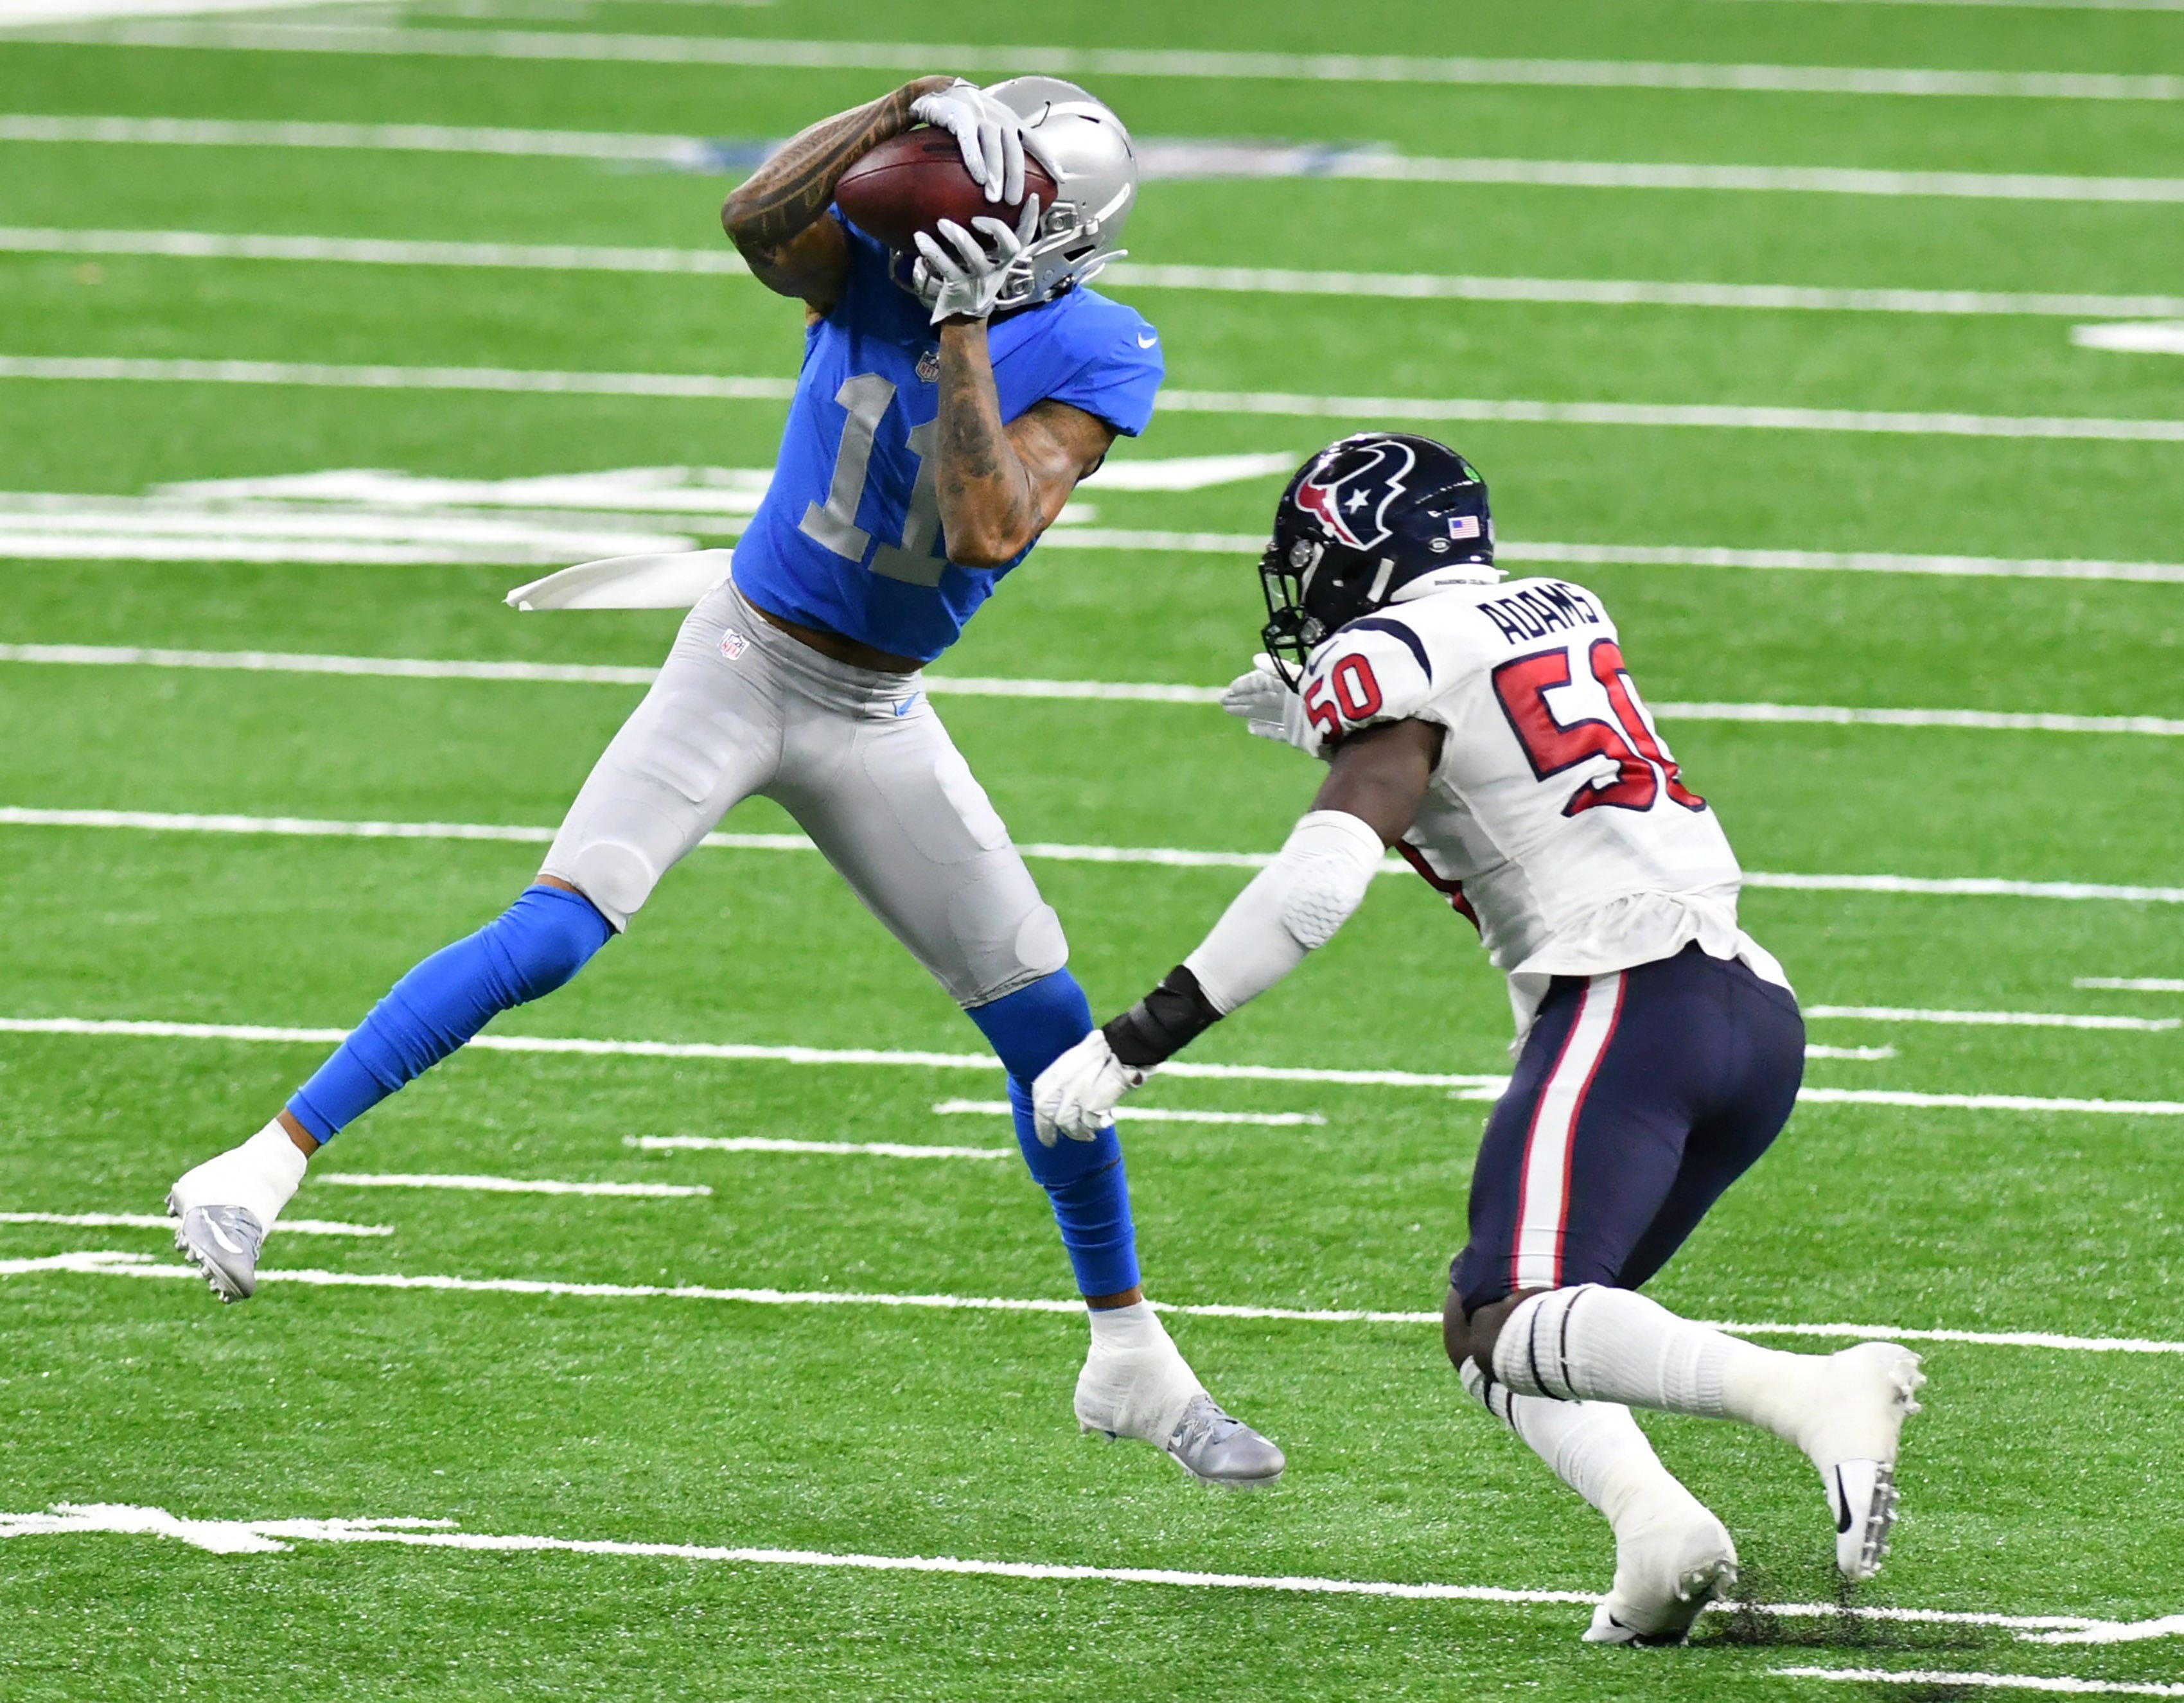 Lions wide receiver Marvin Jones Jr. (11) makes a catch in front of Texans linebacker Tyrell Adams (50) in the first half.